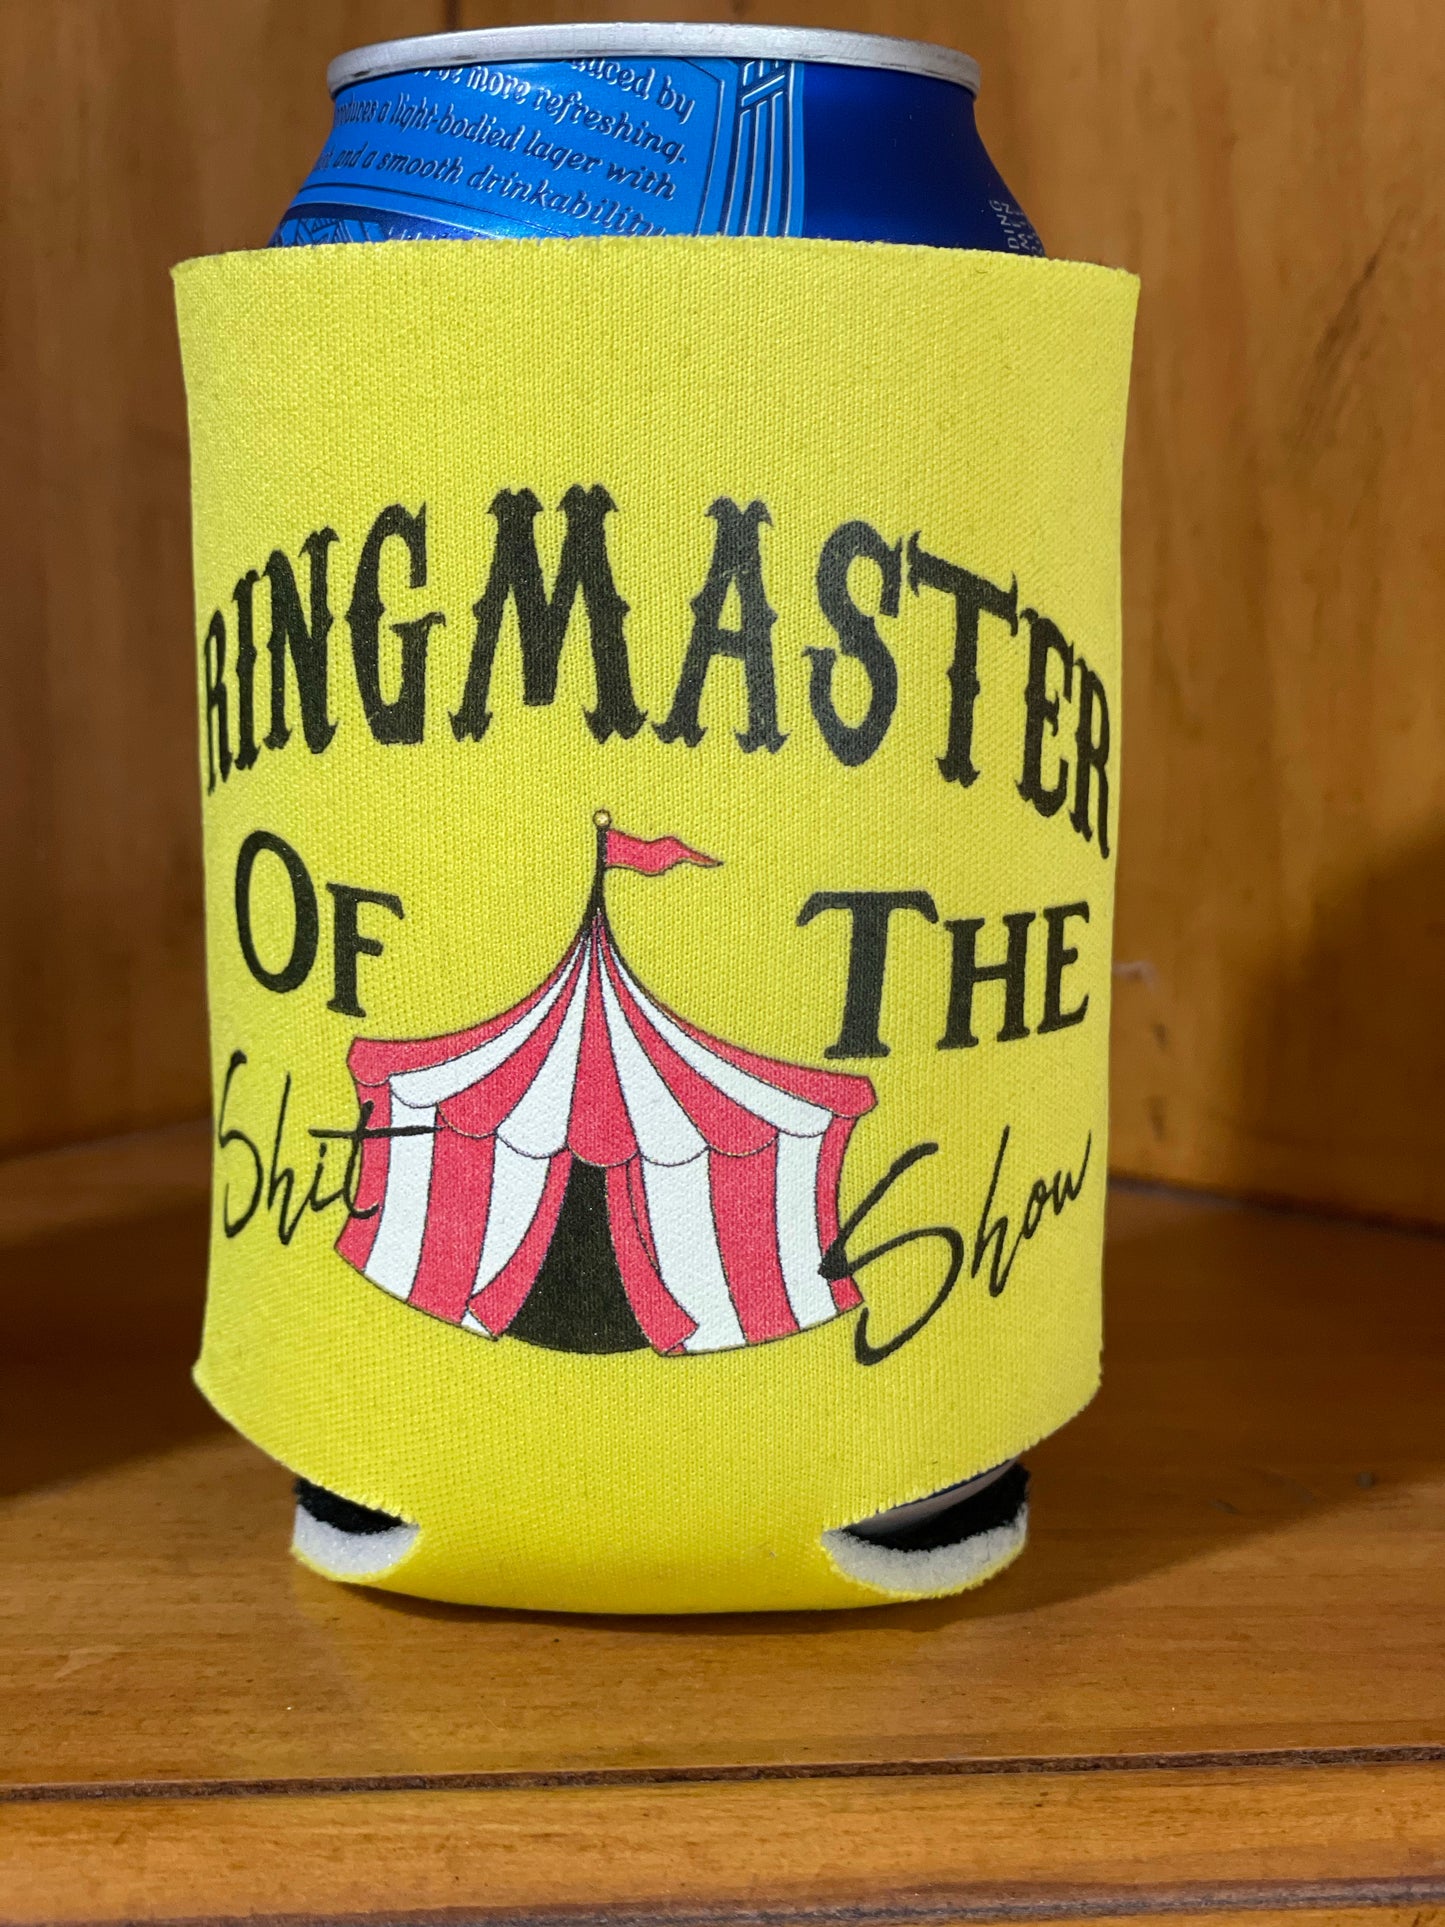 Ring Master of the Shit Show